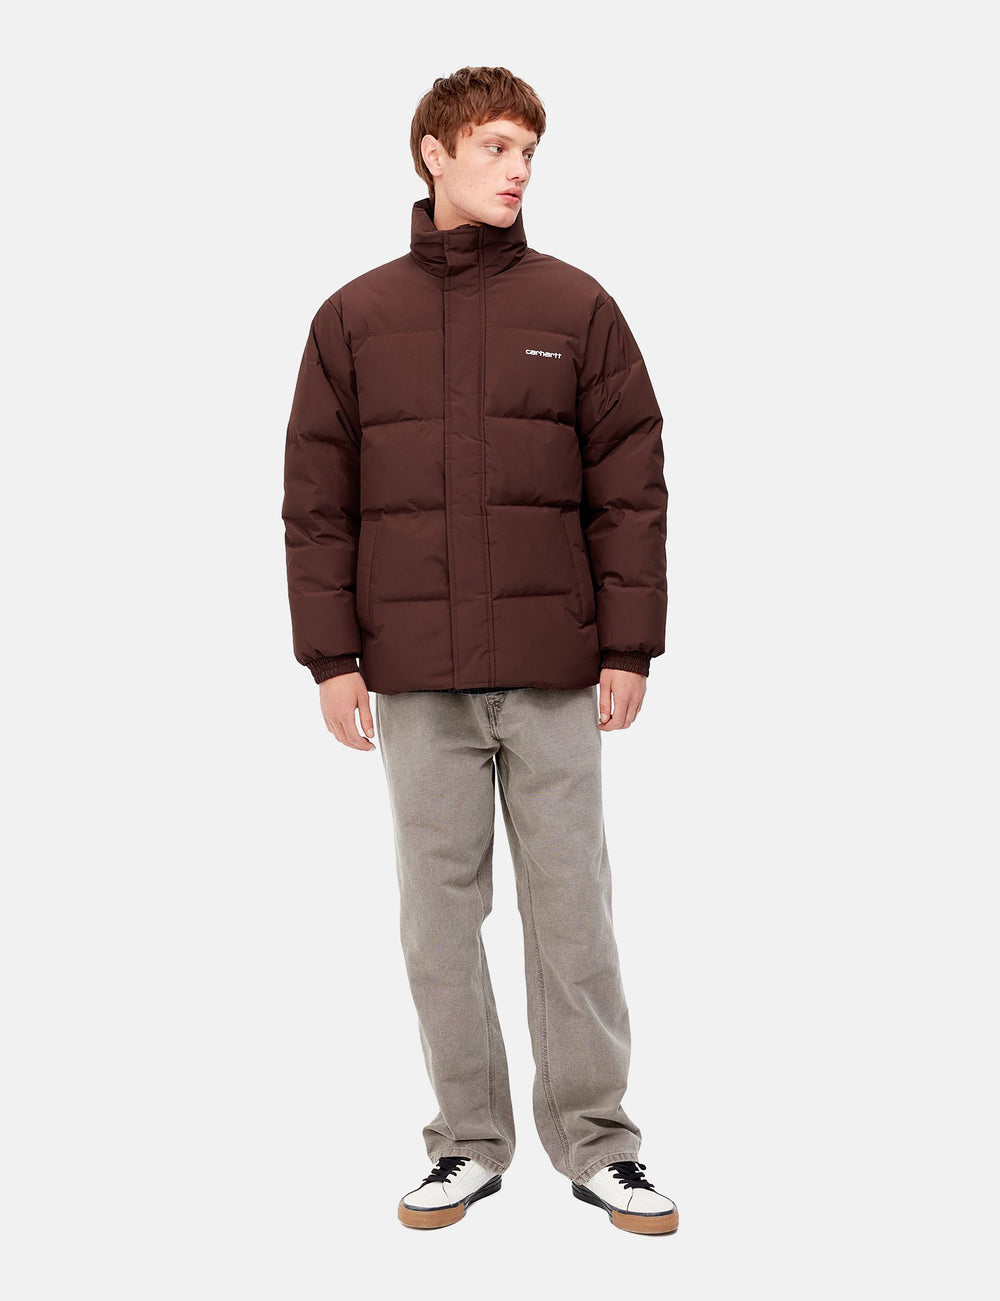 Carhartt-WIP Danville Jacket - Ale Brown/White I Urban Excess